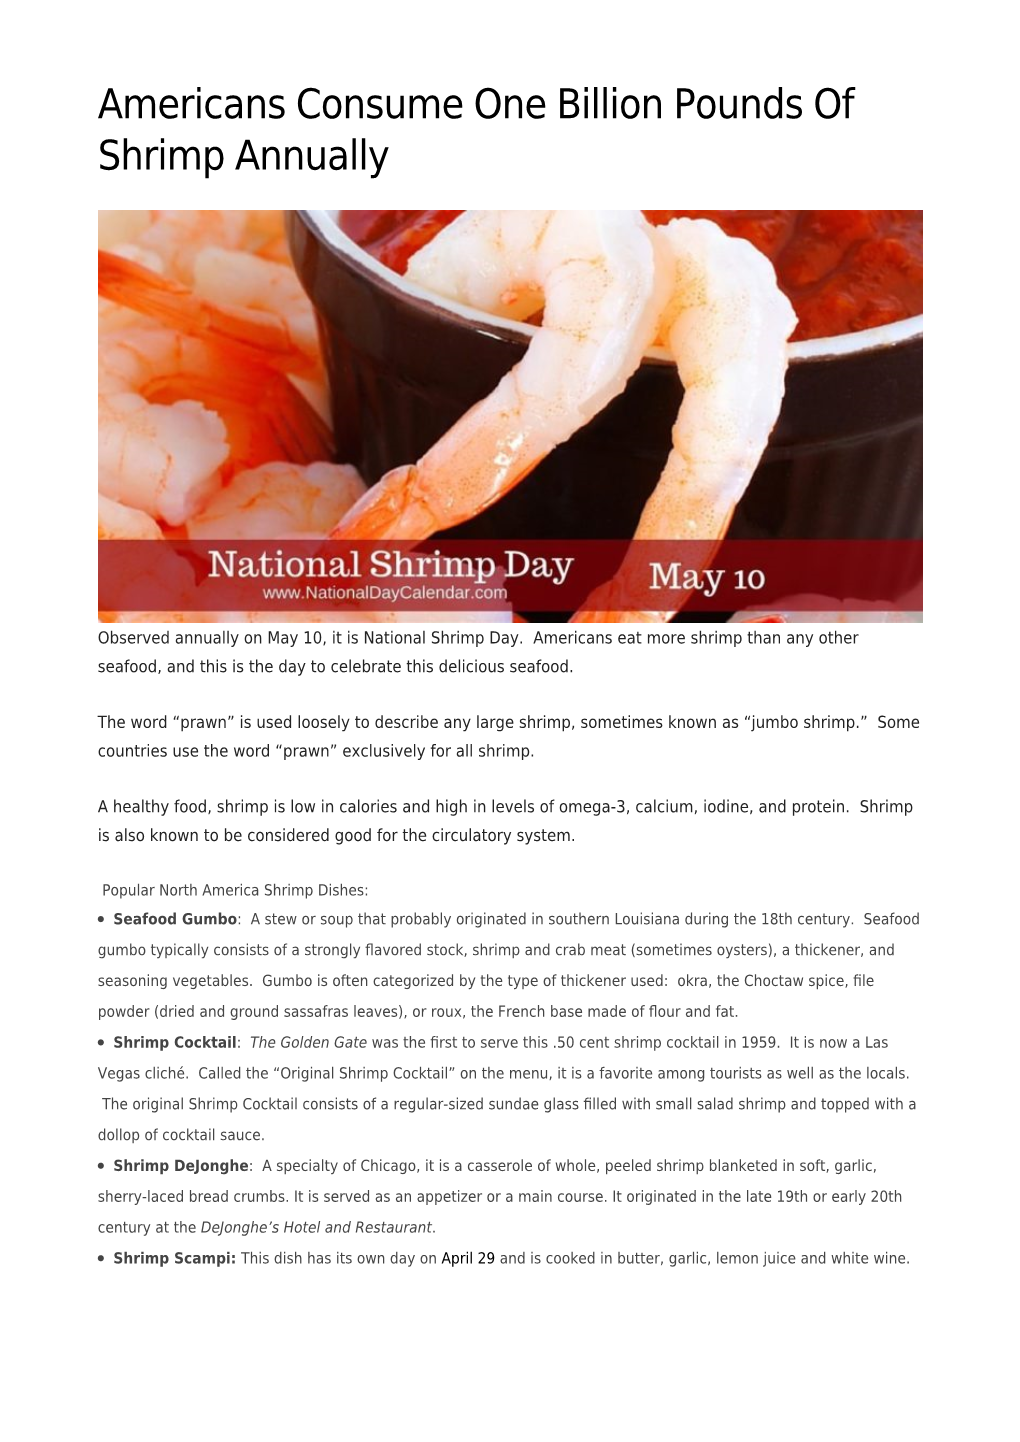 Americans Consume One Billion Pounds of Shrimp Annually